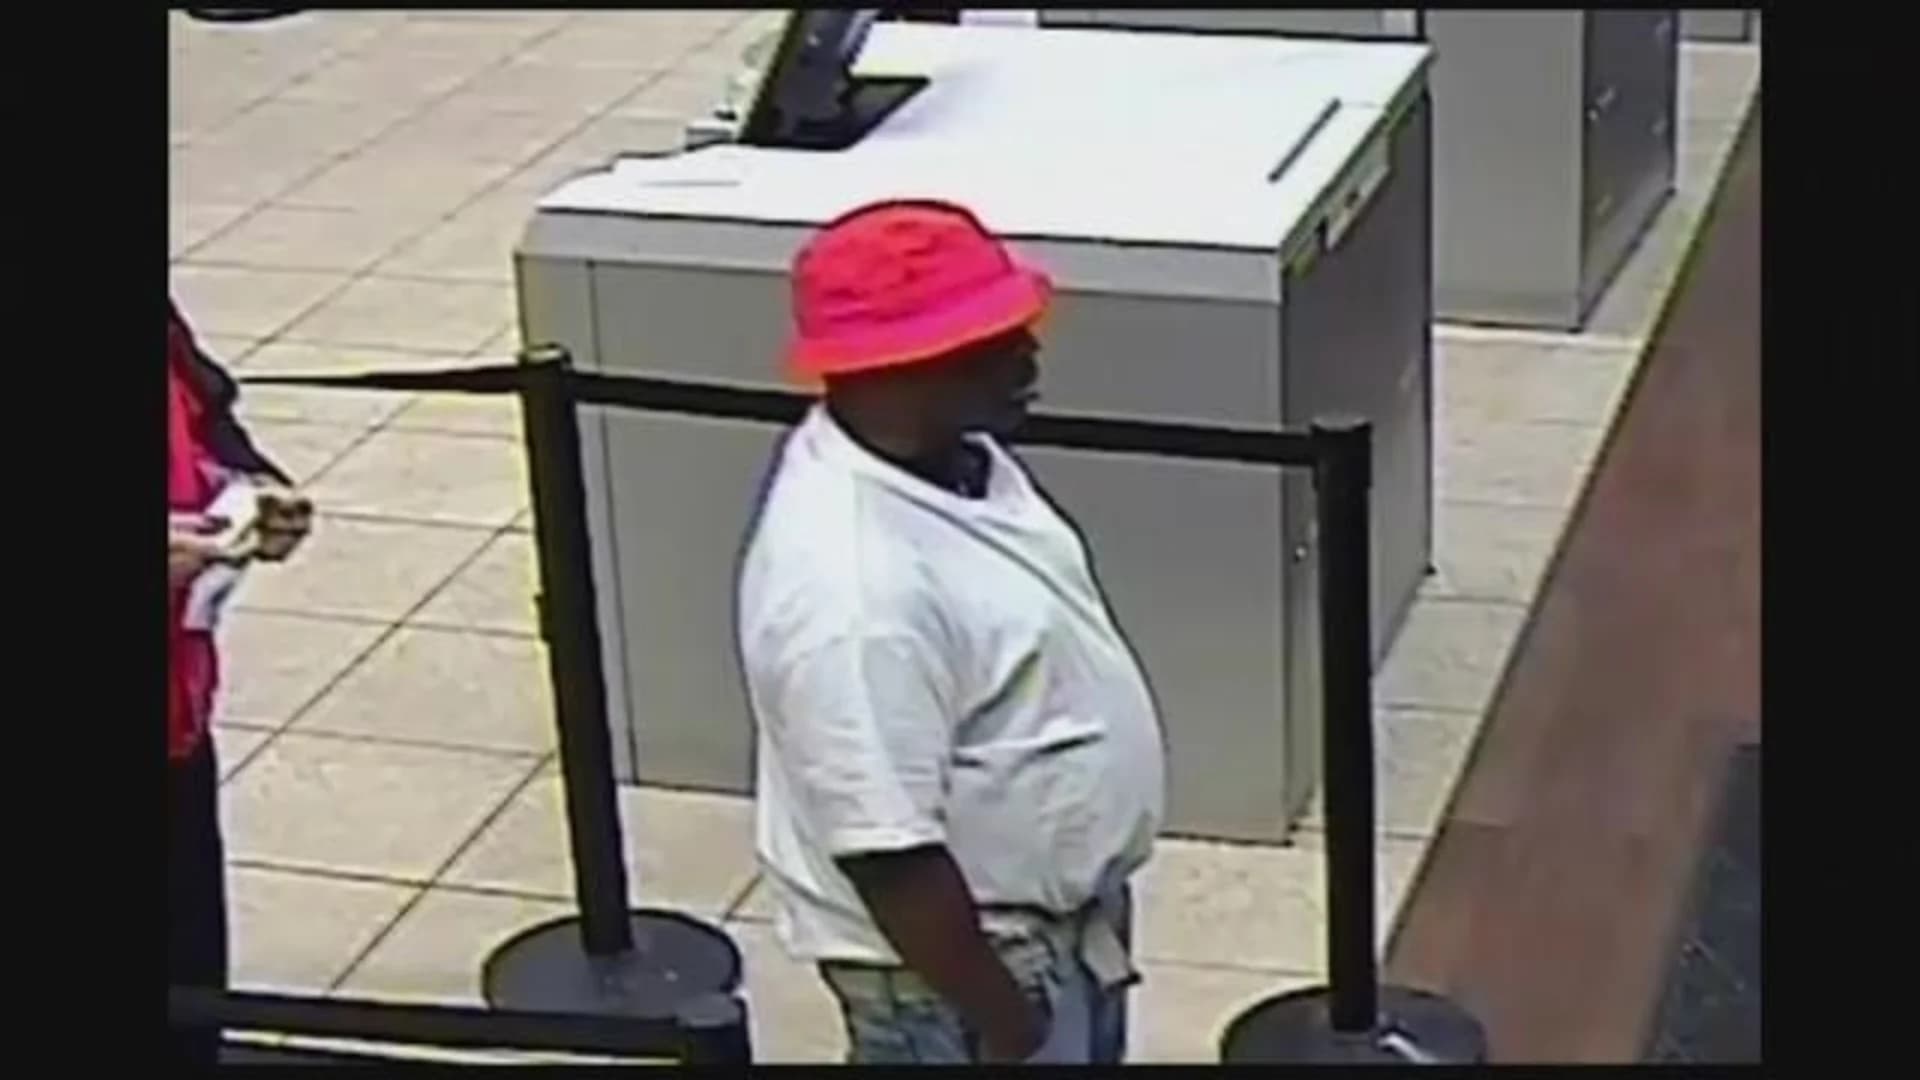 Police search for man who robbed bank, stole $1,000 cash